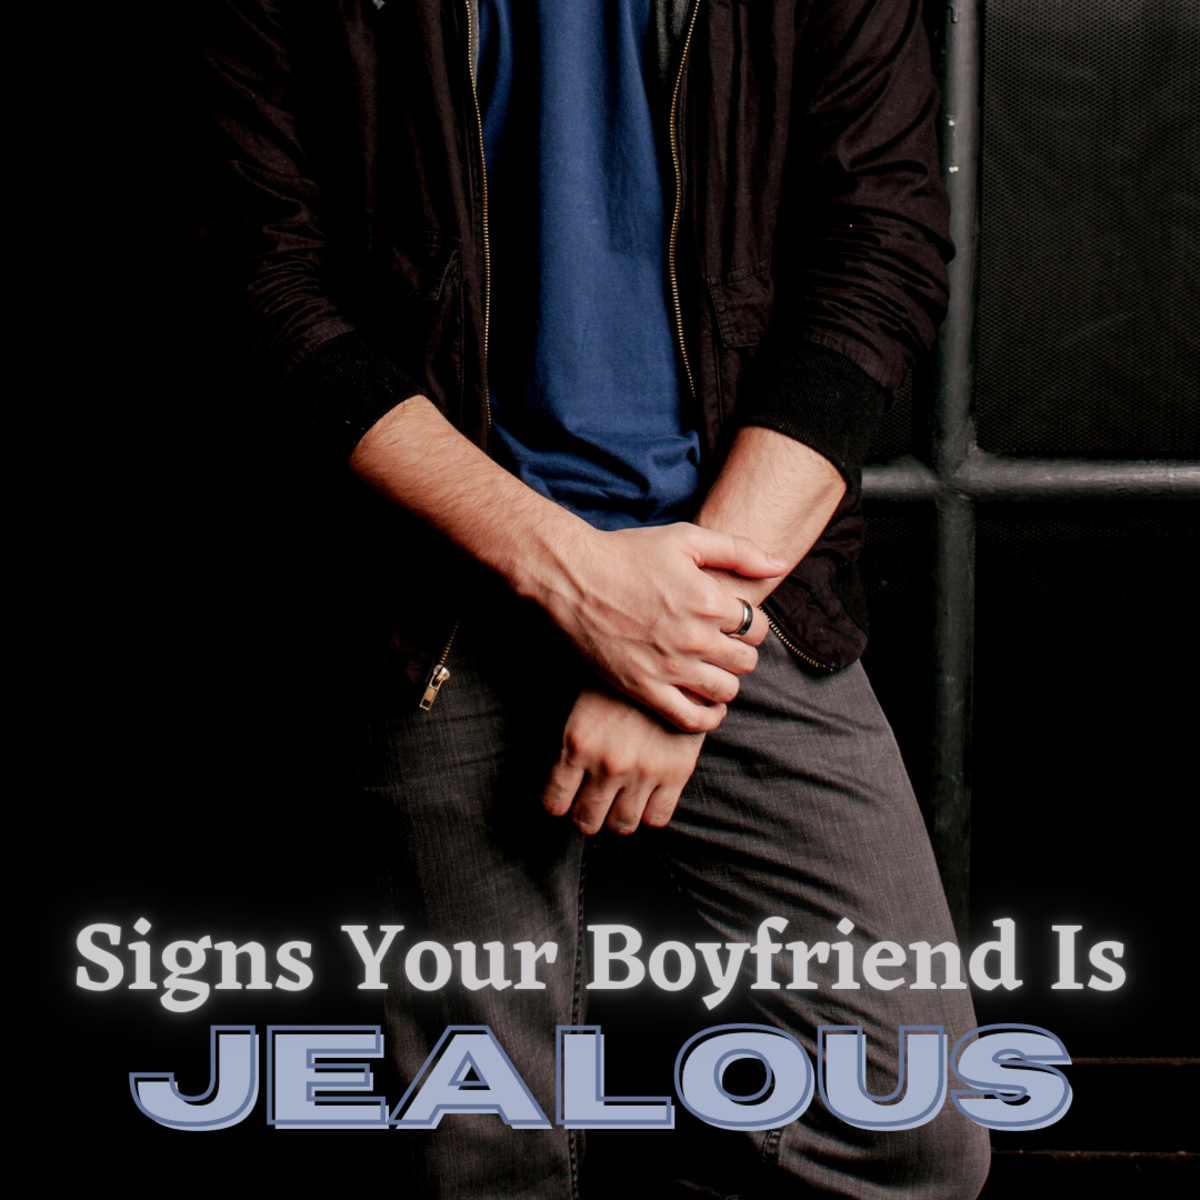 Learn how you can recognize and deal with a jealous boyfriend.